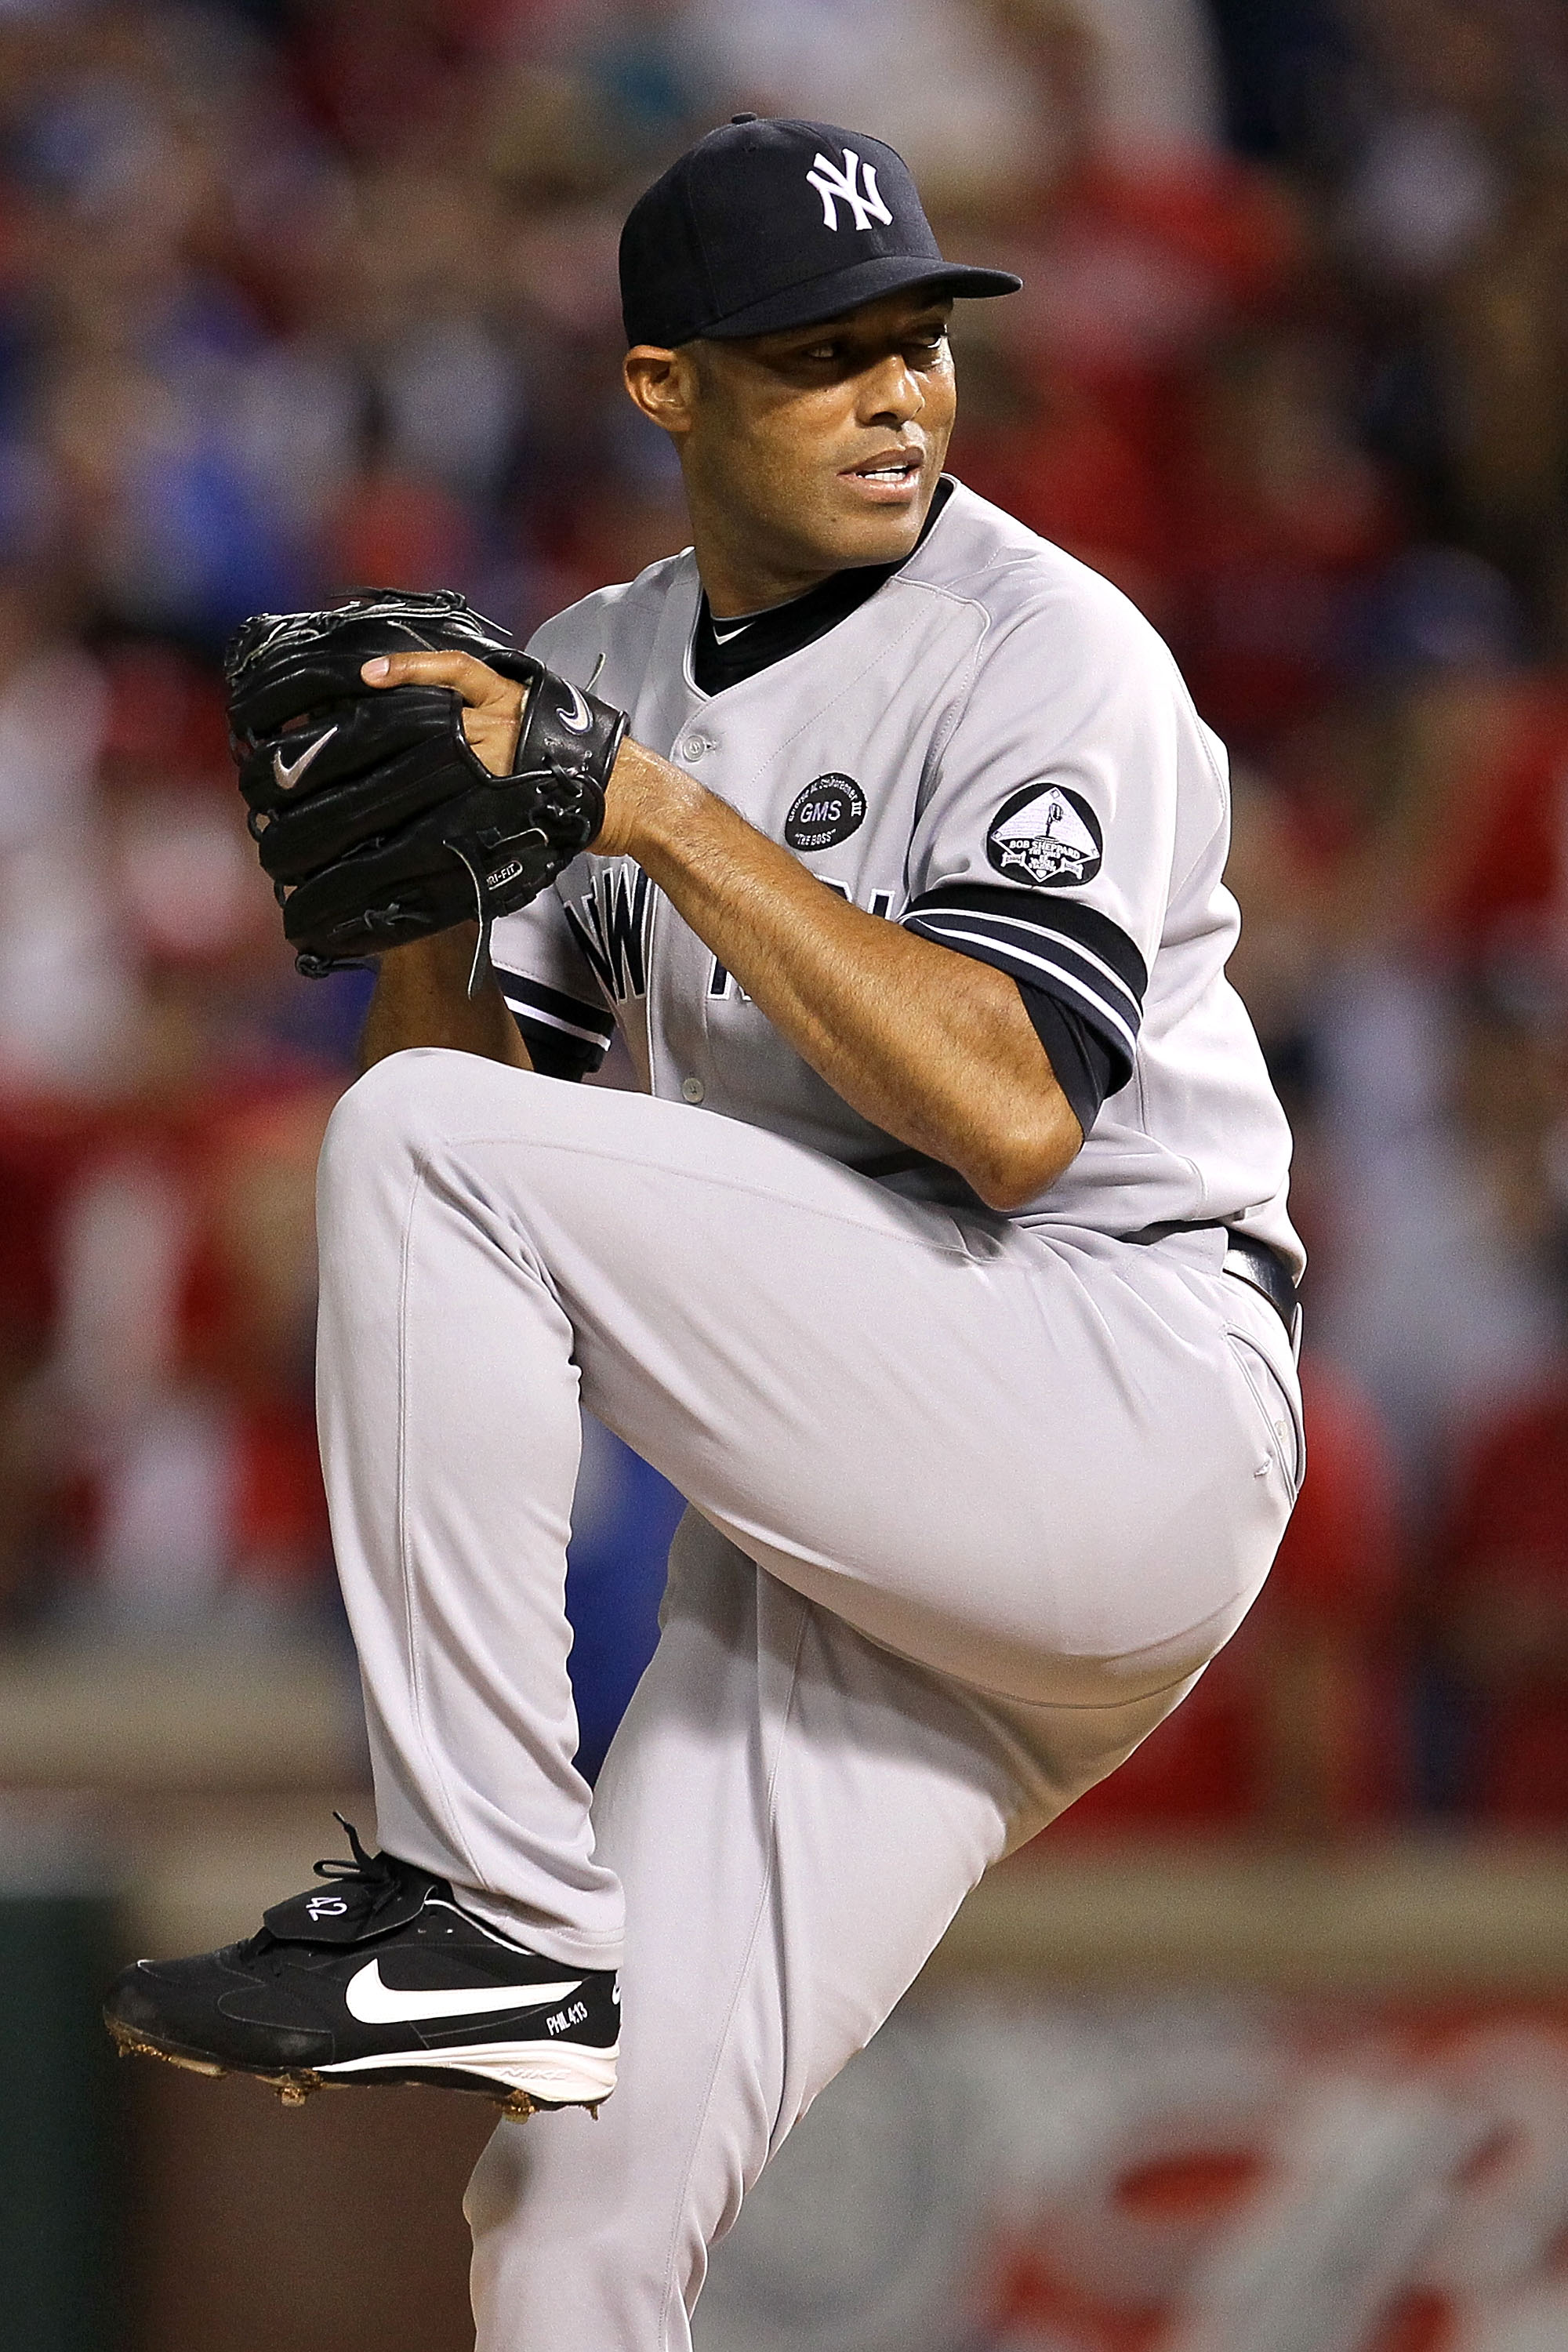 Colorado Rockies on X: When visiting CO in May, Mariano Rivera